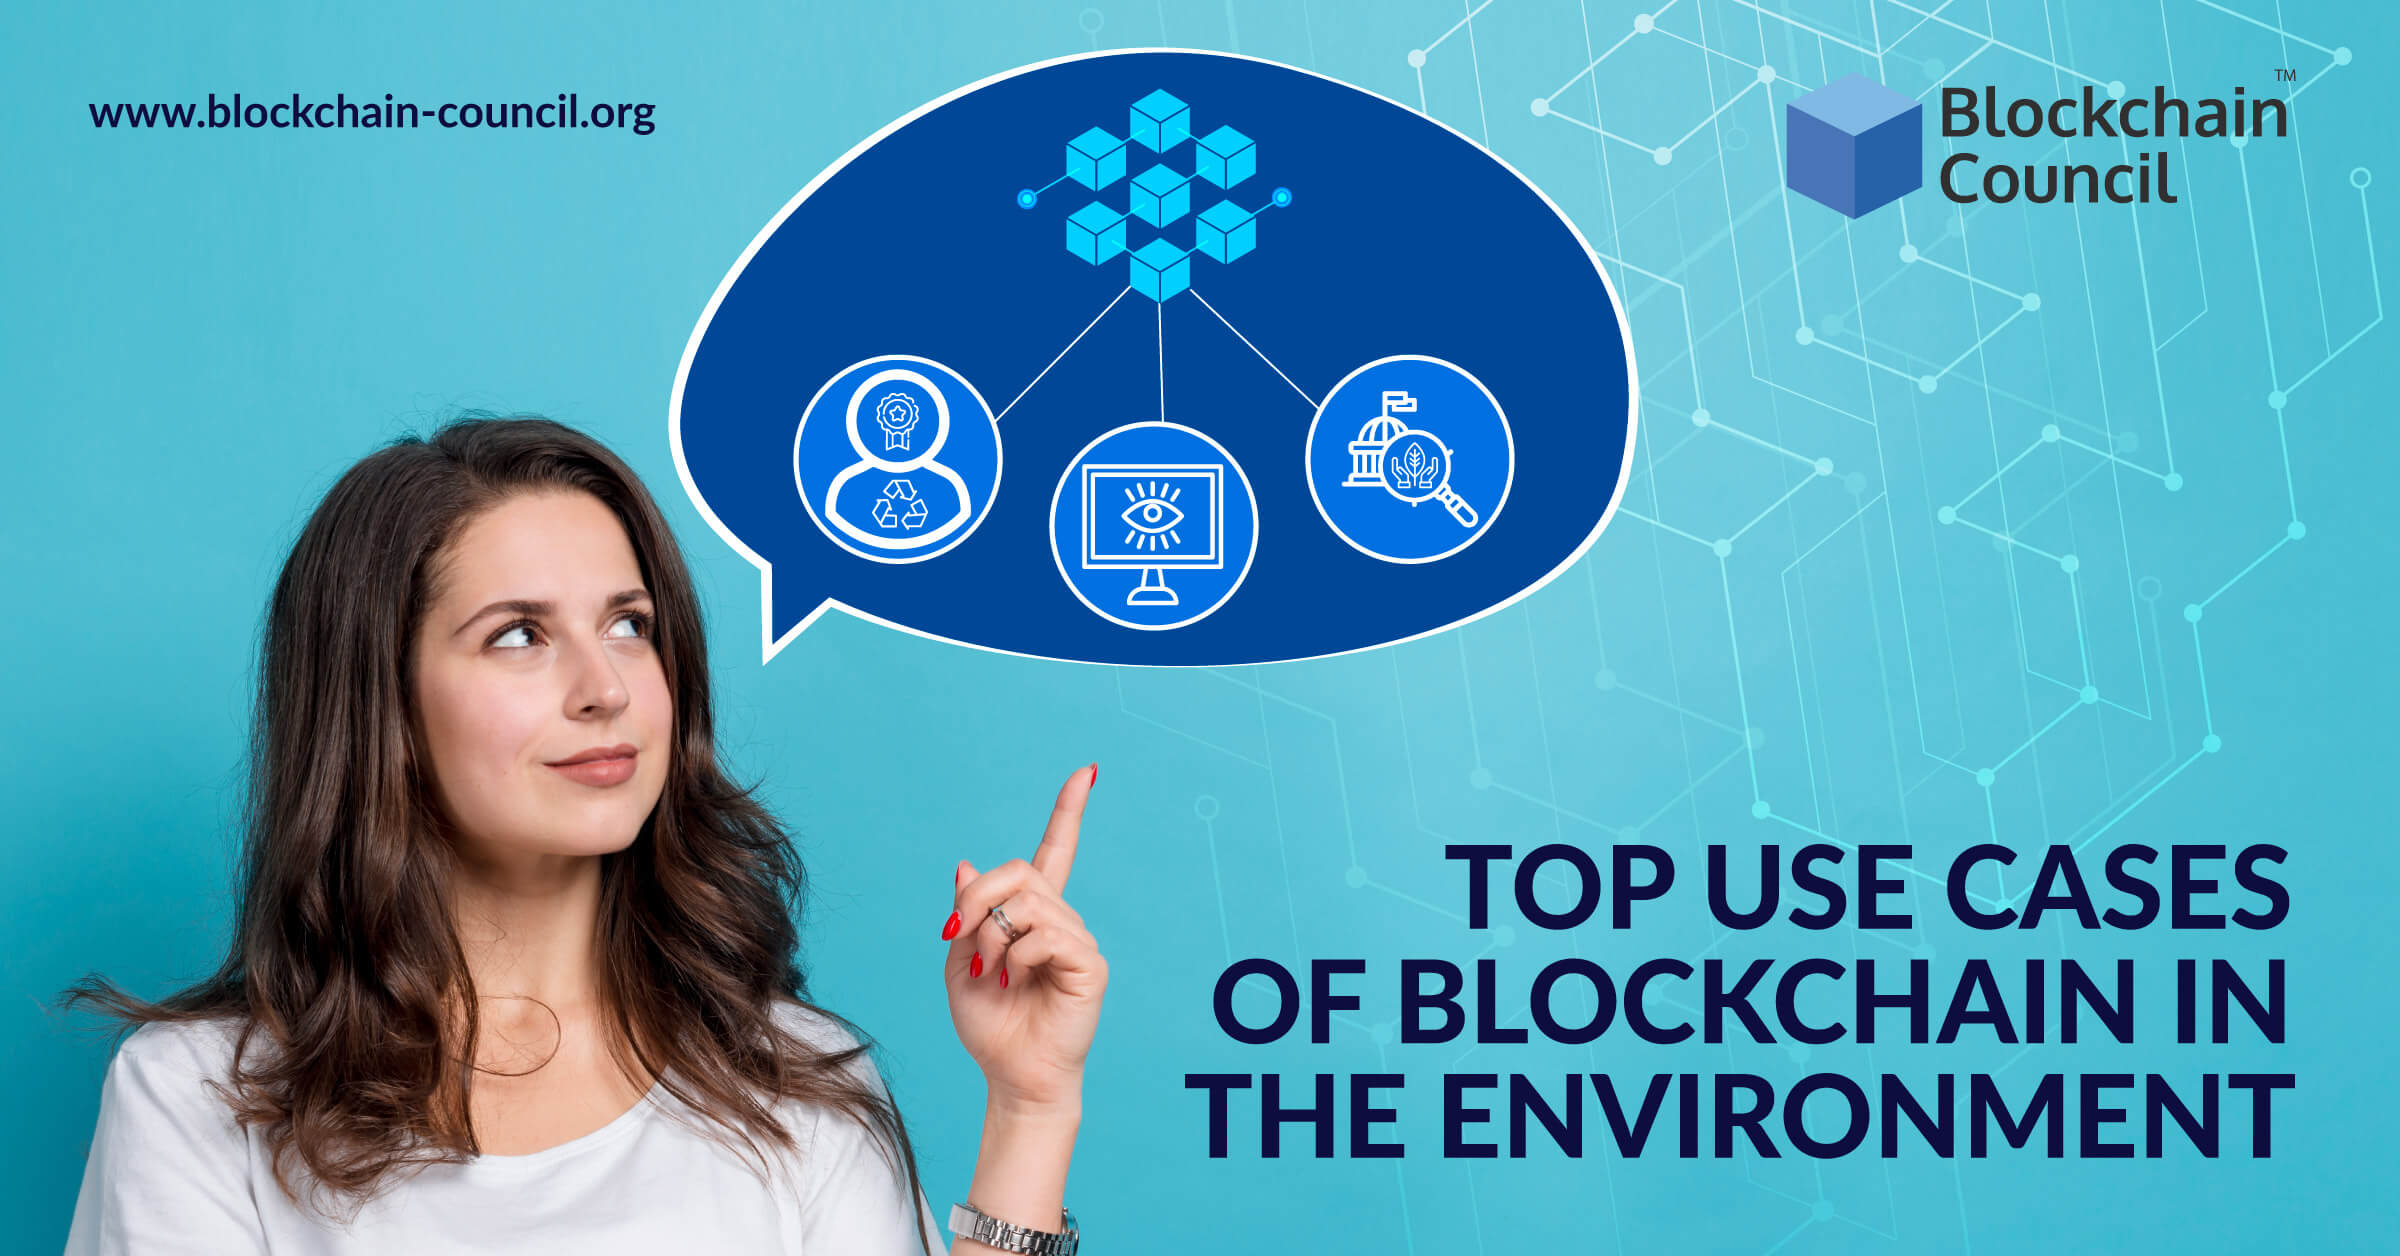 Top Use Cases of Blockchain in the Environment